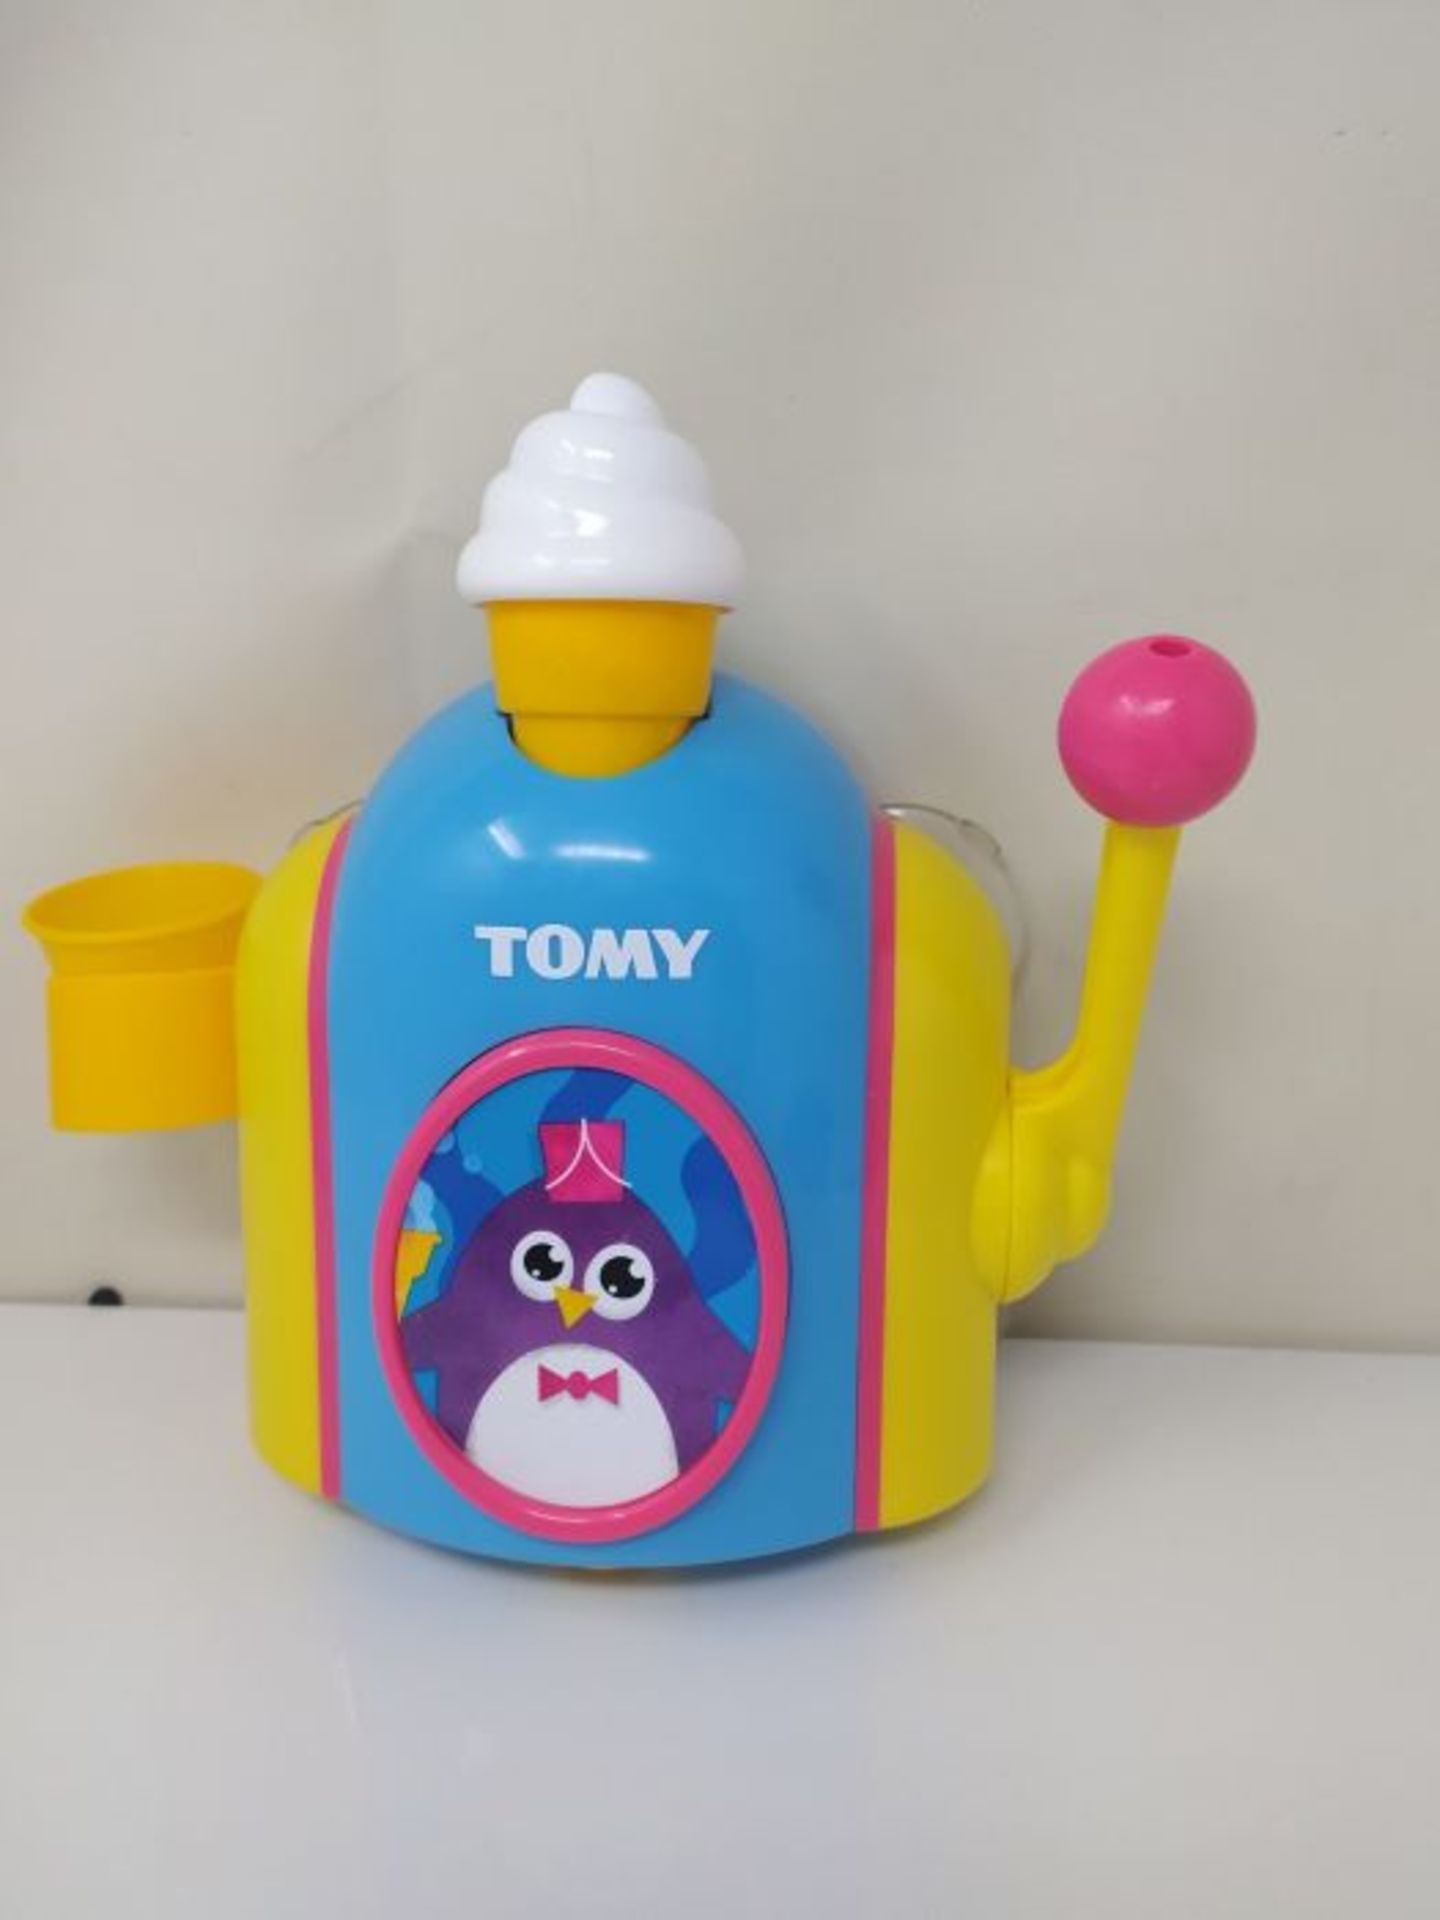 Toomies Tomy Foam Cone Factory Baby Bath Toy-Ice Cream Themed E72378, Multicolour, 21 - Image 2 of 2